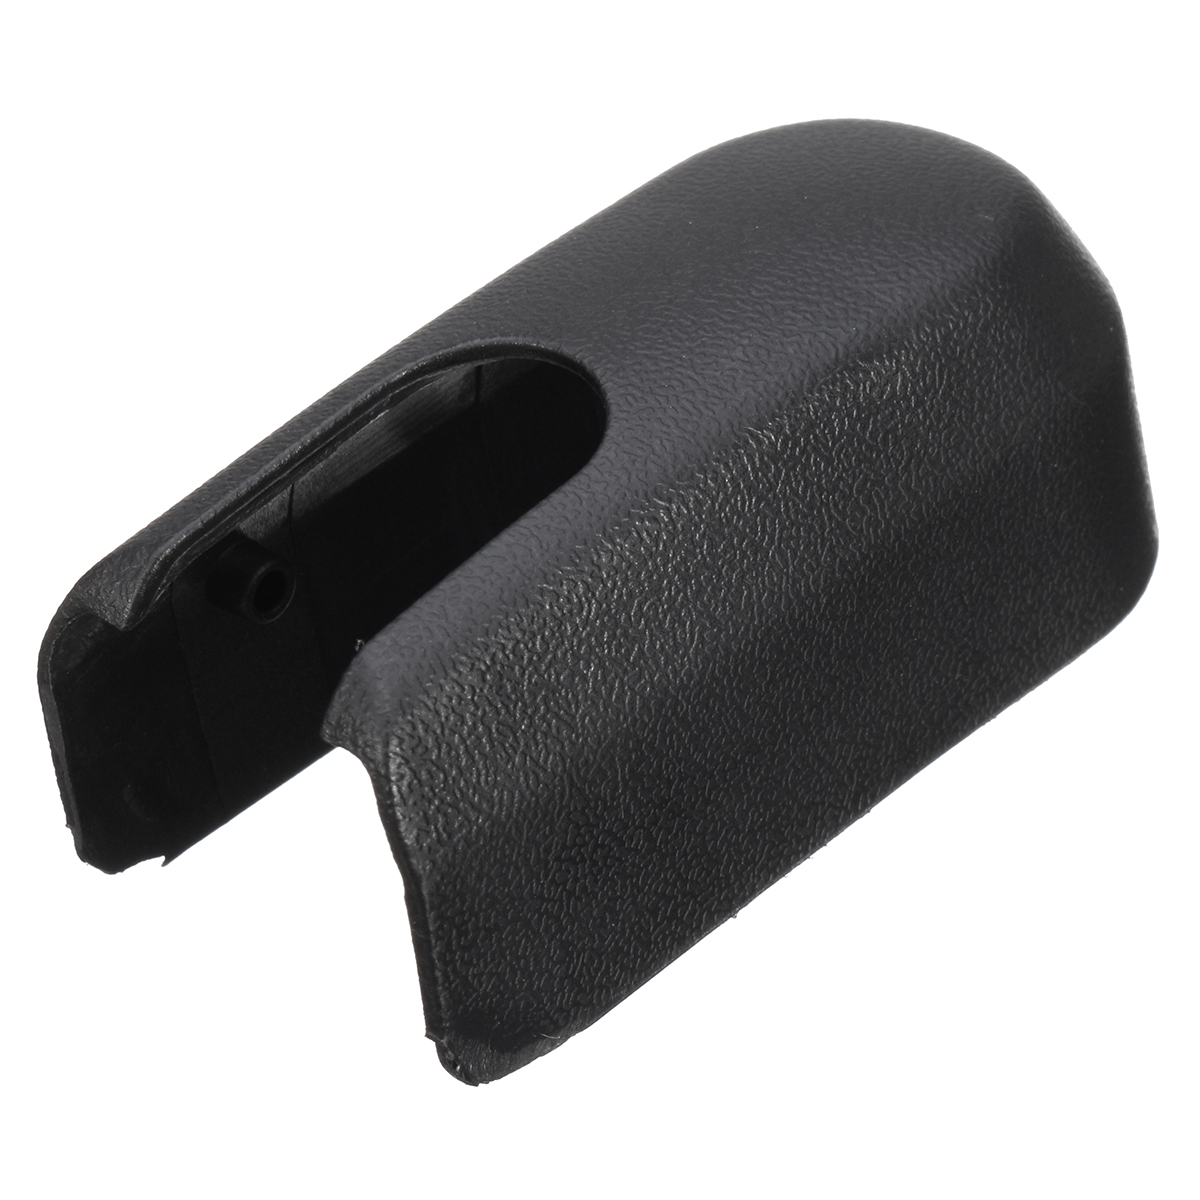 Rear Wind Shield Wiper Arm Mounting Nut Cover Cap Black Surface Paint Treatment